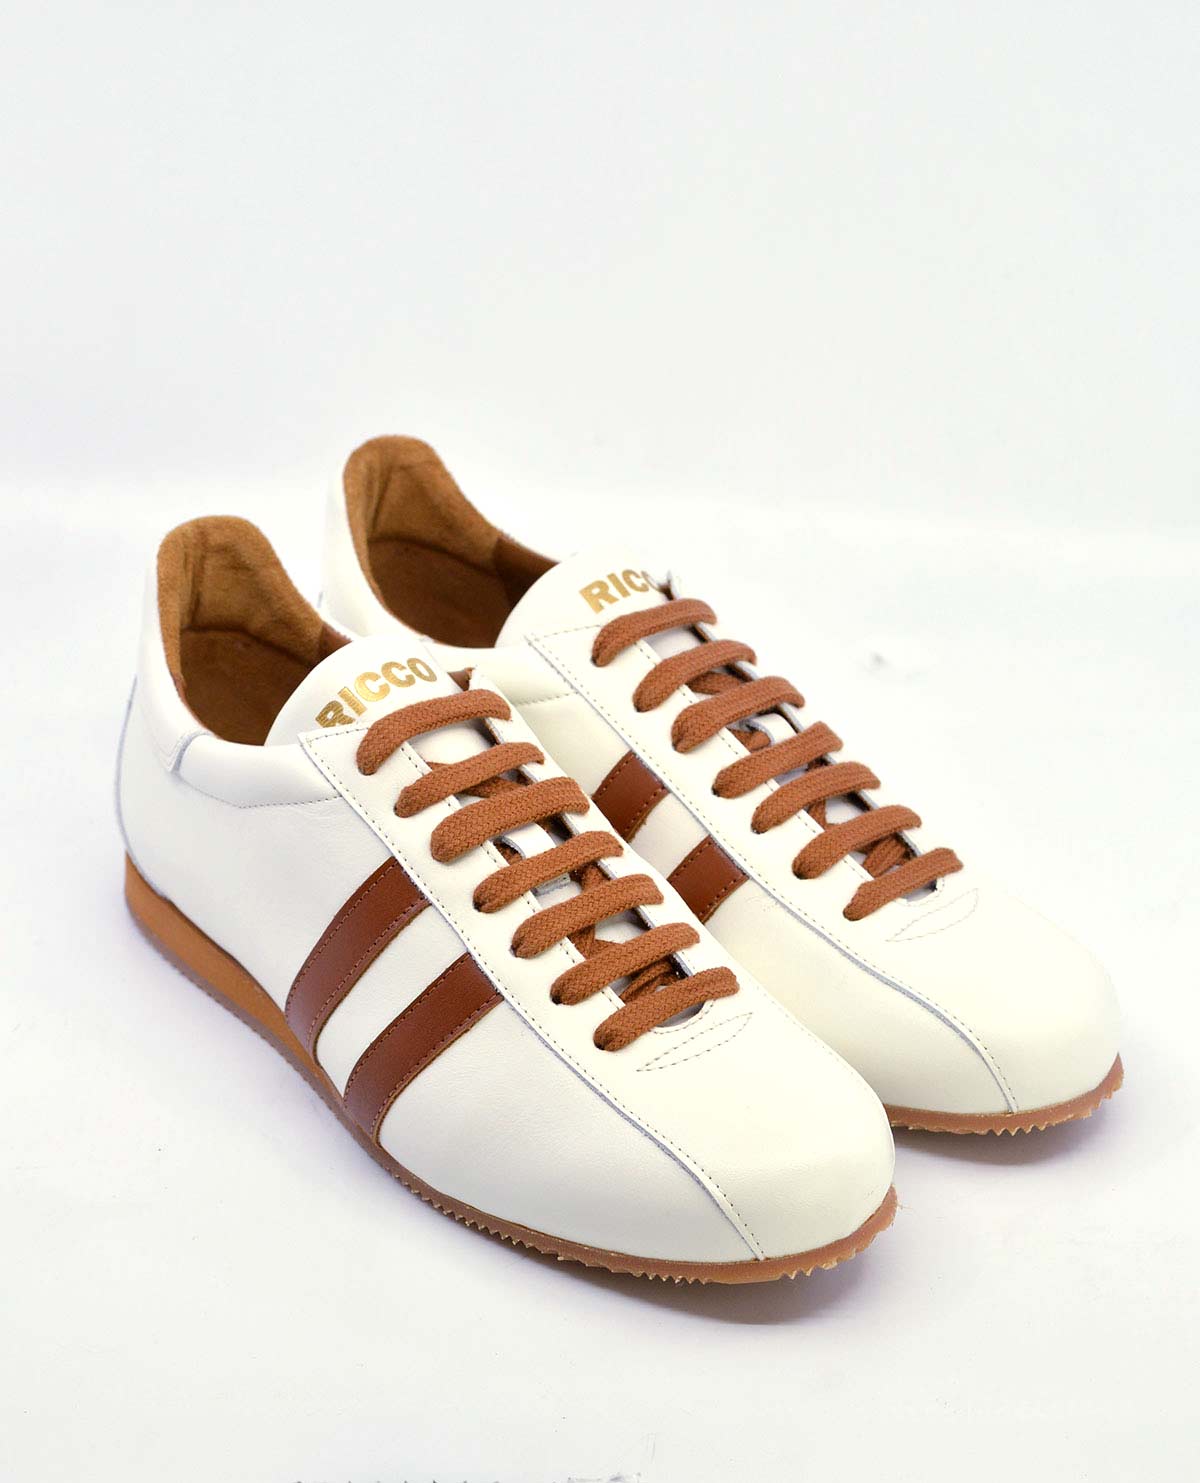 The “Ricco” In Cream & Pecan Stripe – Old School Trainers – Mod Shoes